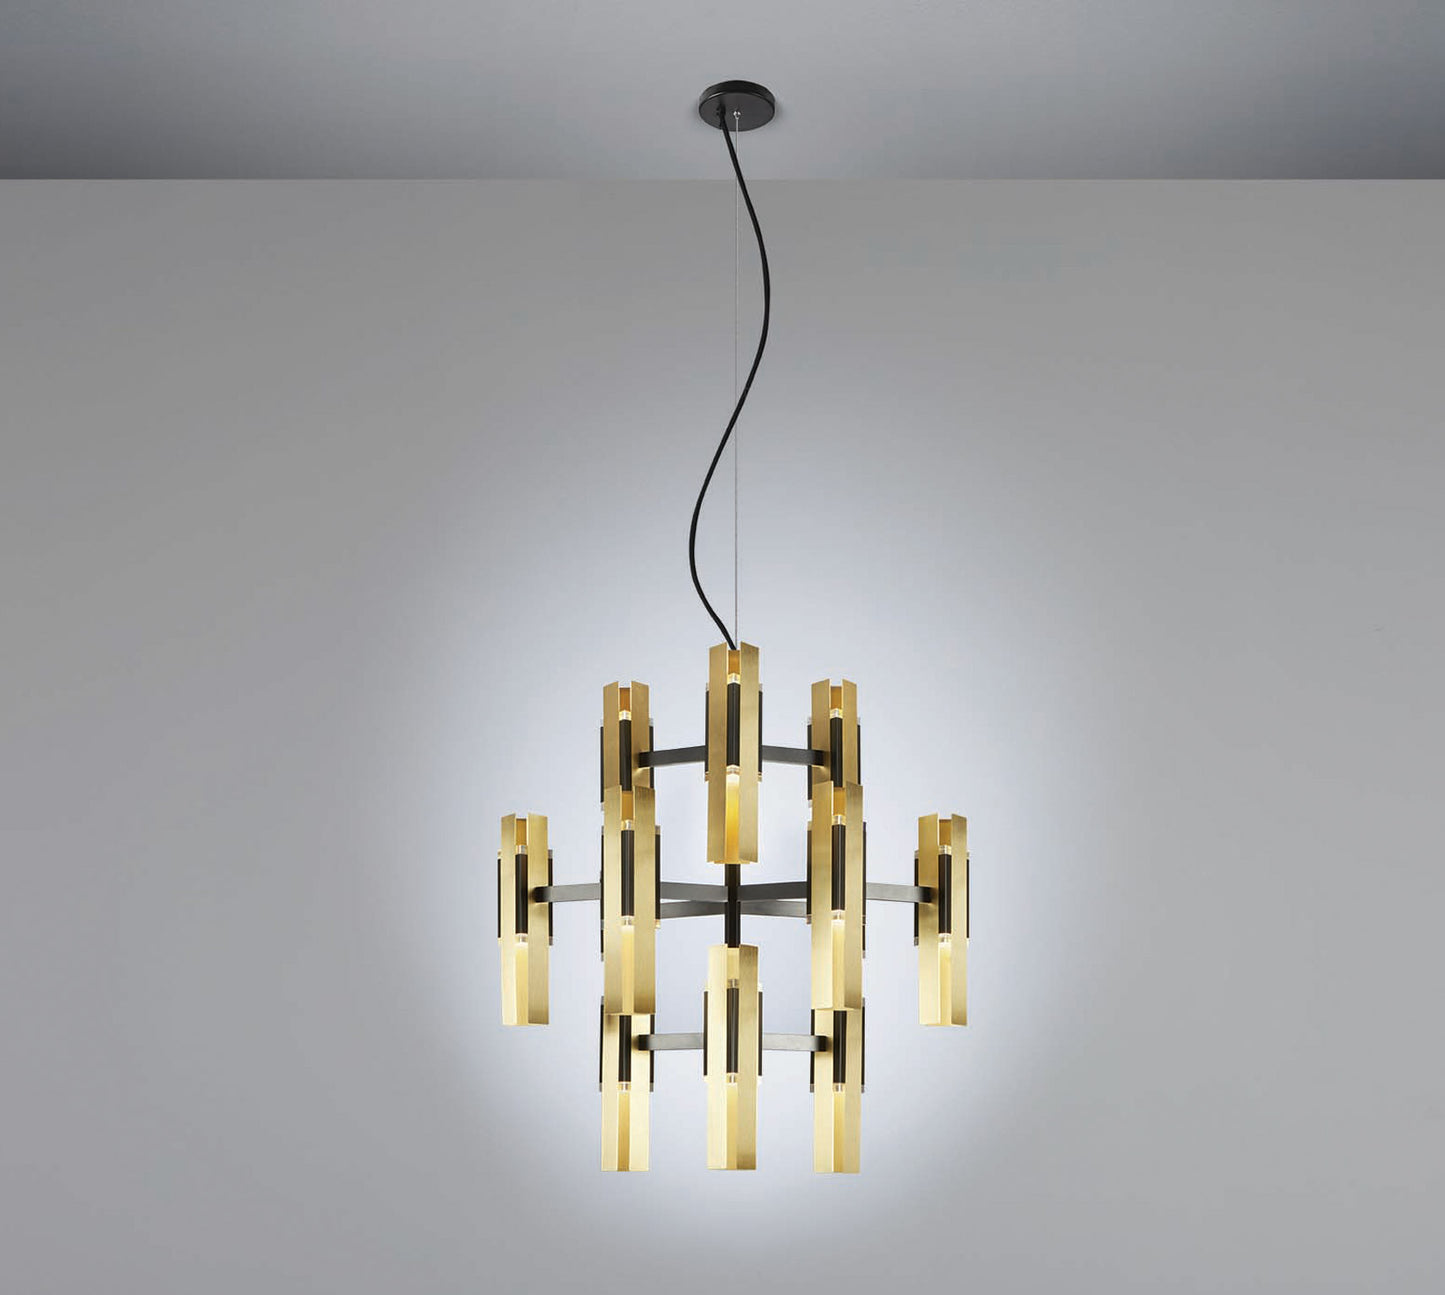 EXCALIBUR CHANDELIER 559.12 BY TOOY $14,298.00